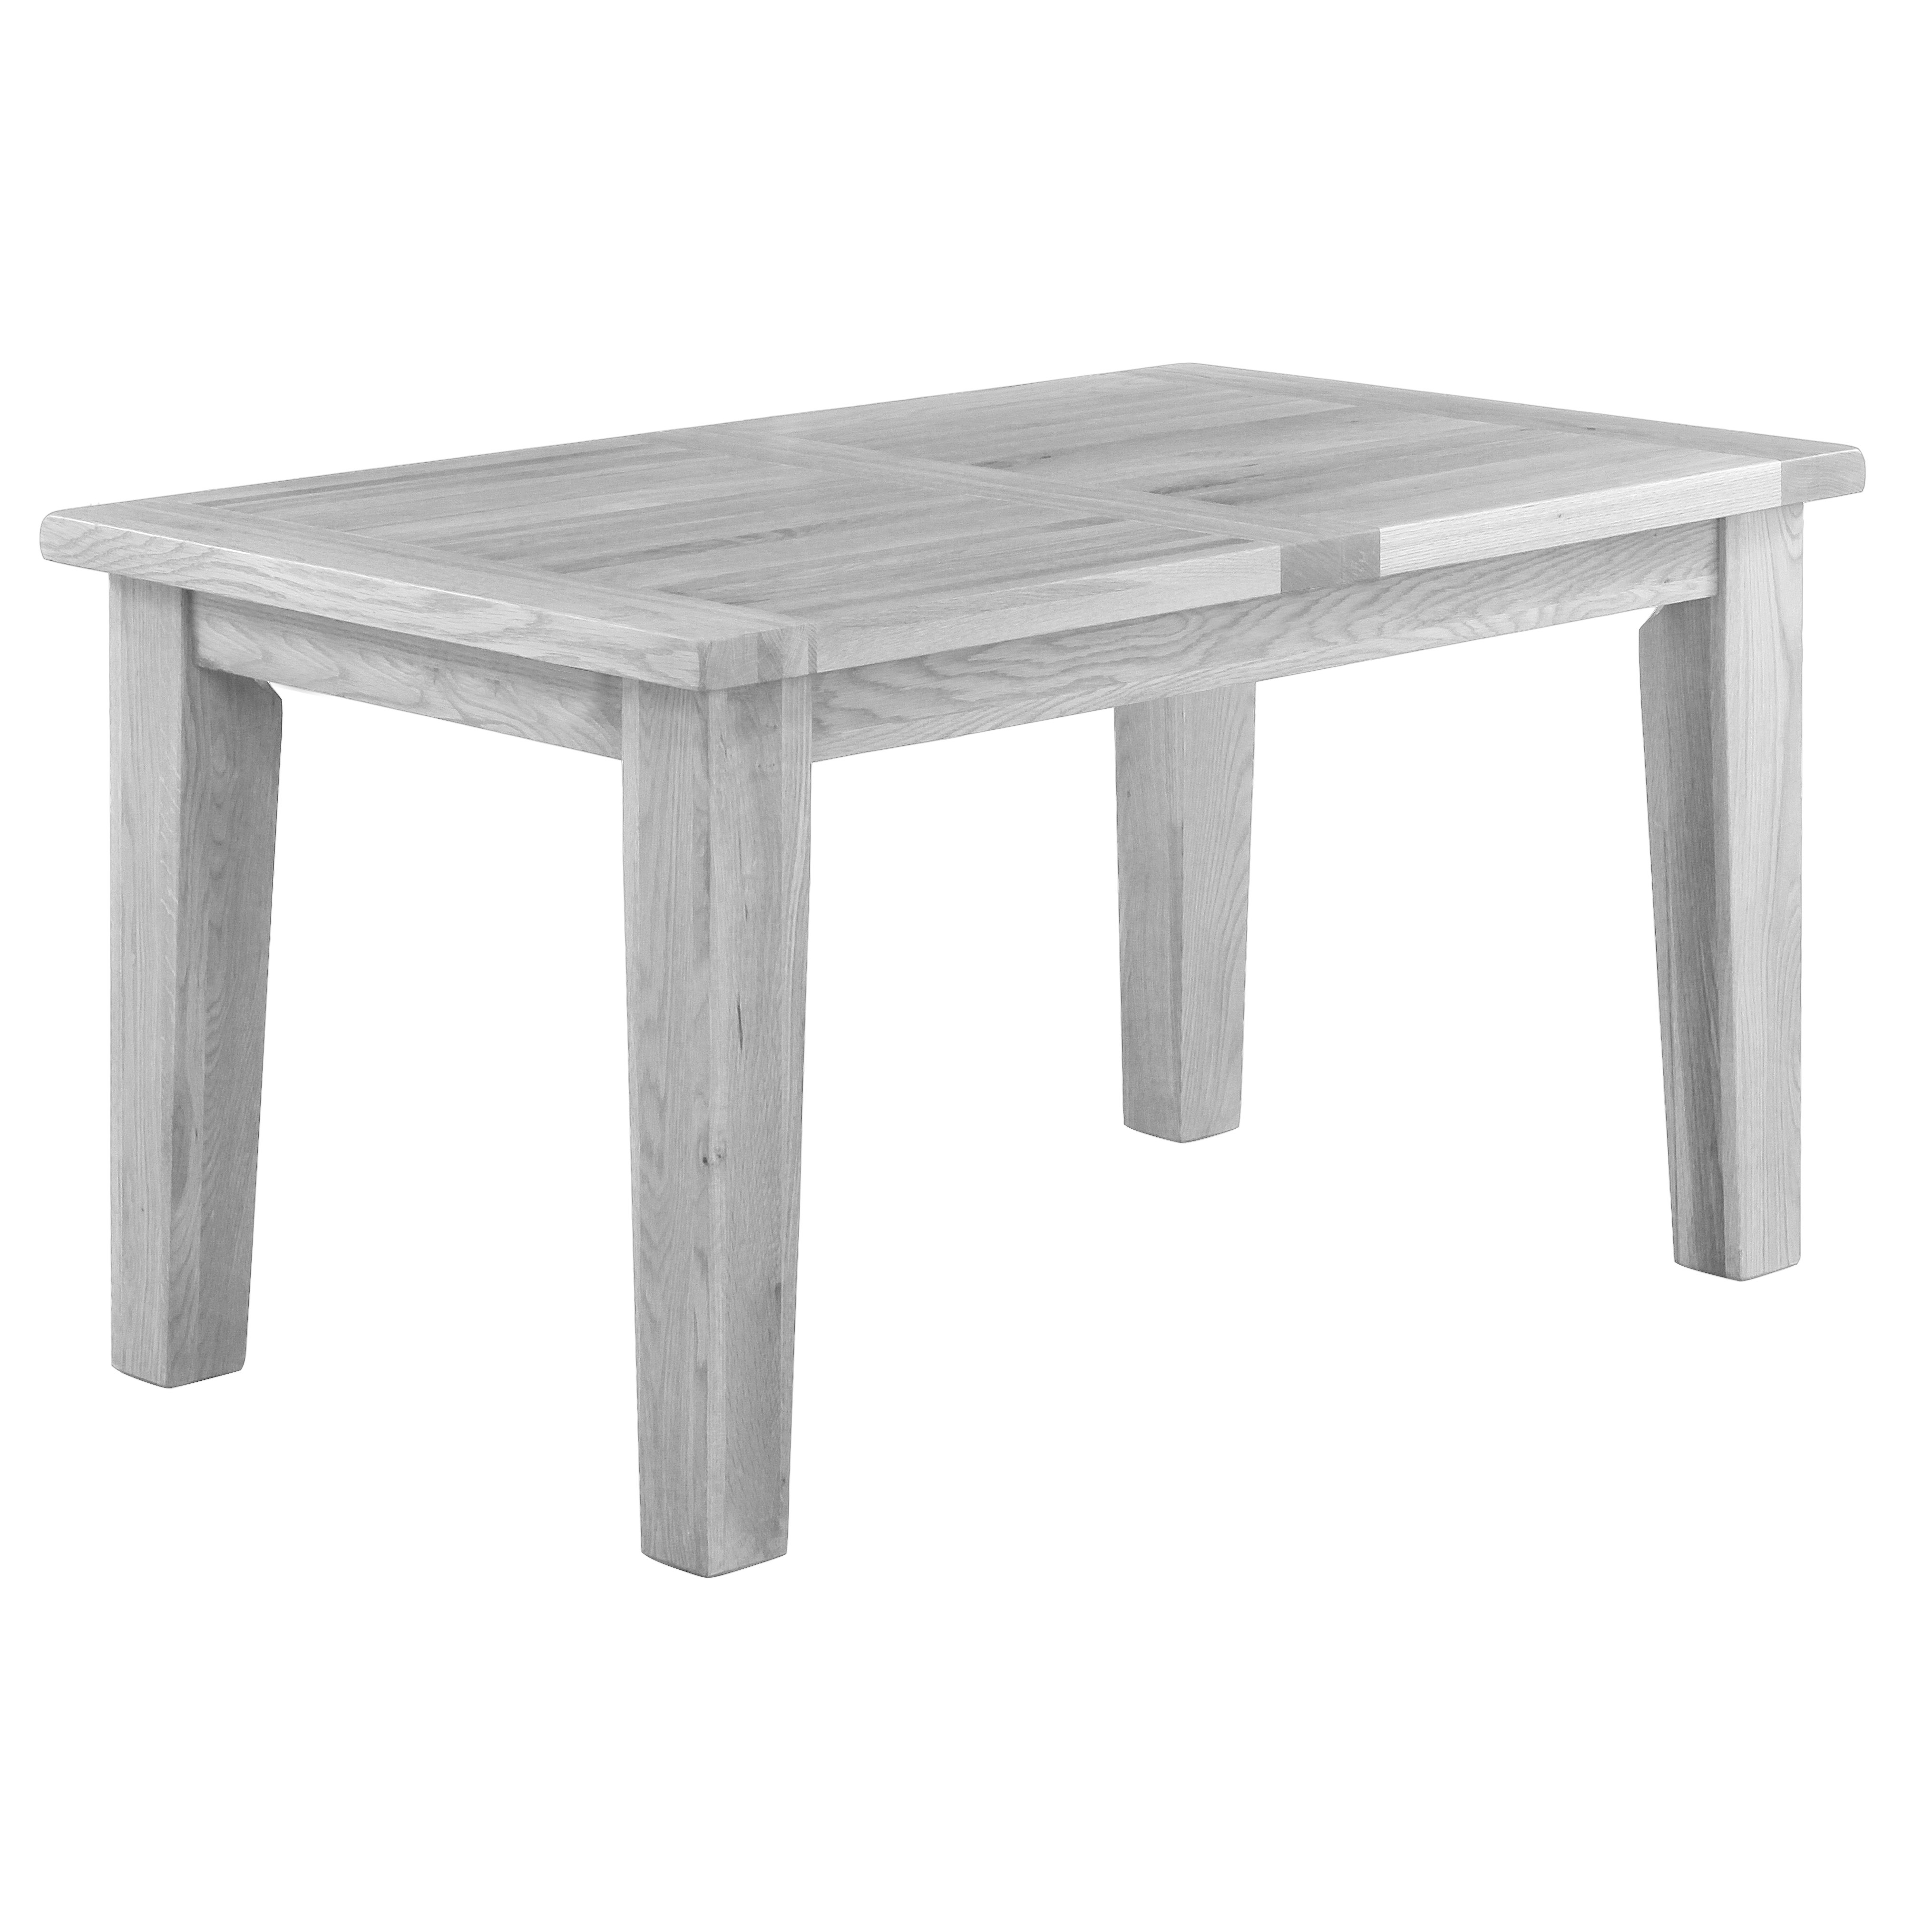 Fixed Top Tables